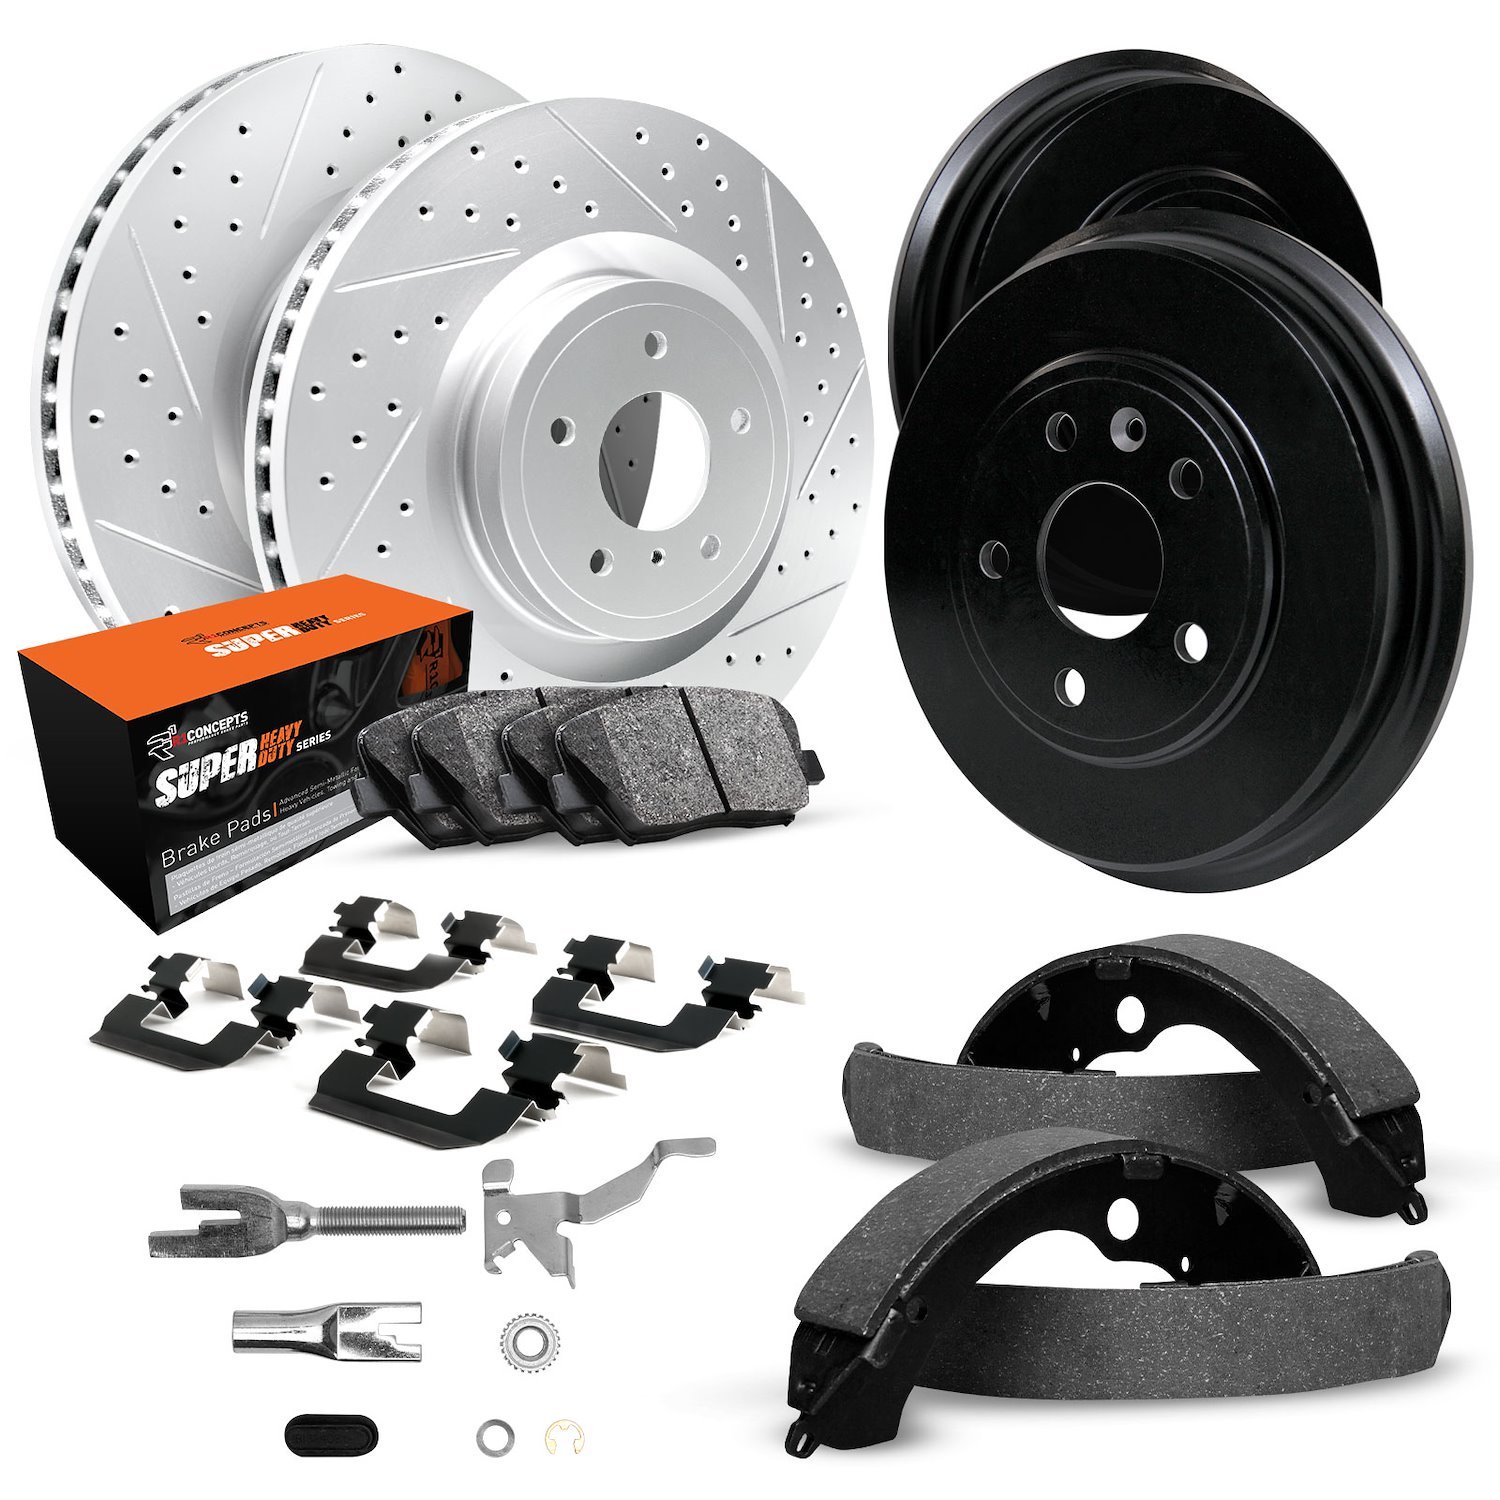 GEO-Carbon Drilled/Slotted Rotors/Drums w/Super-Duty Pads/Shoes/Hardware/Adjusters, 1973-1975 GM, Position: Front/Rear